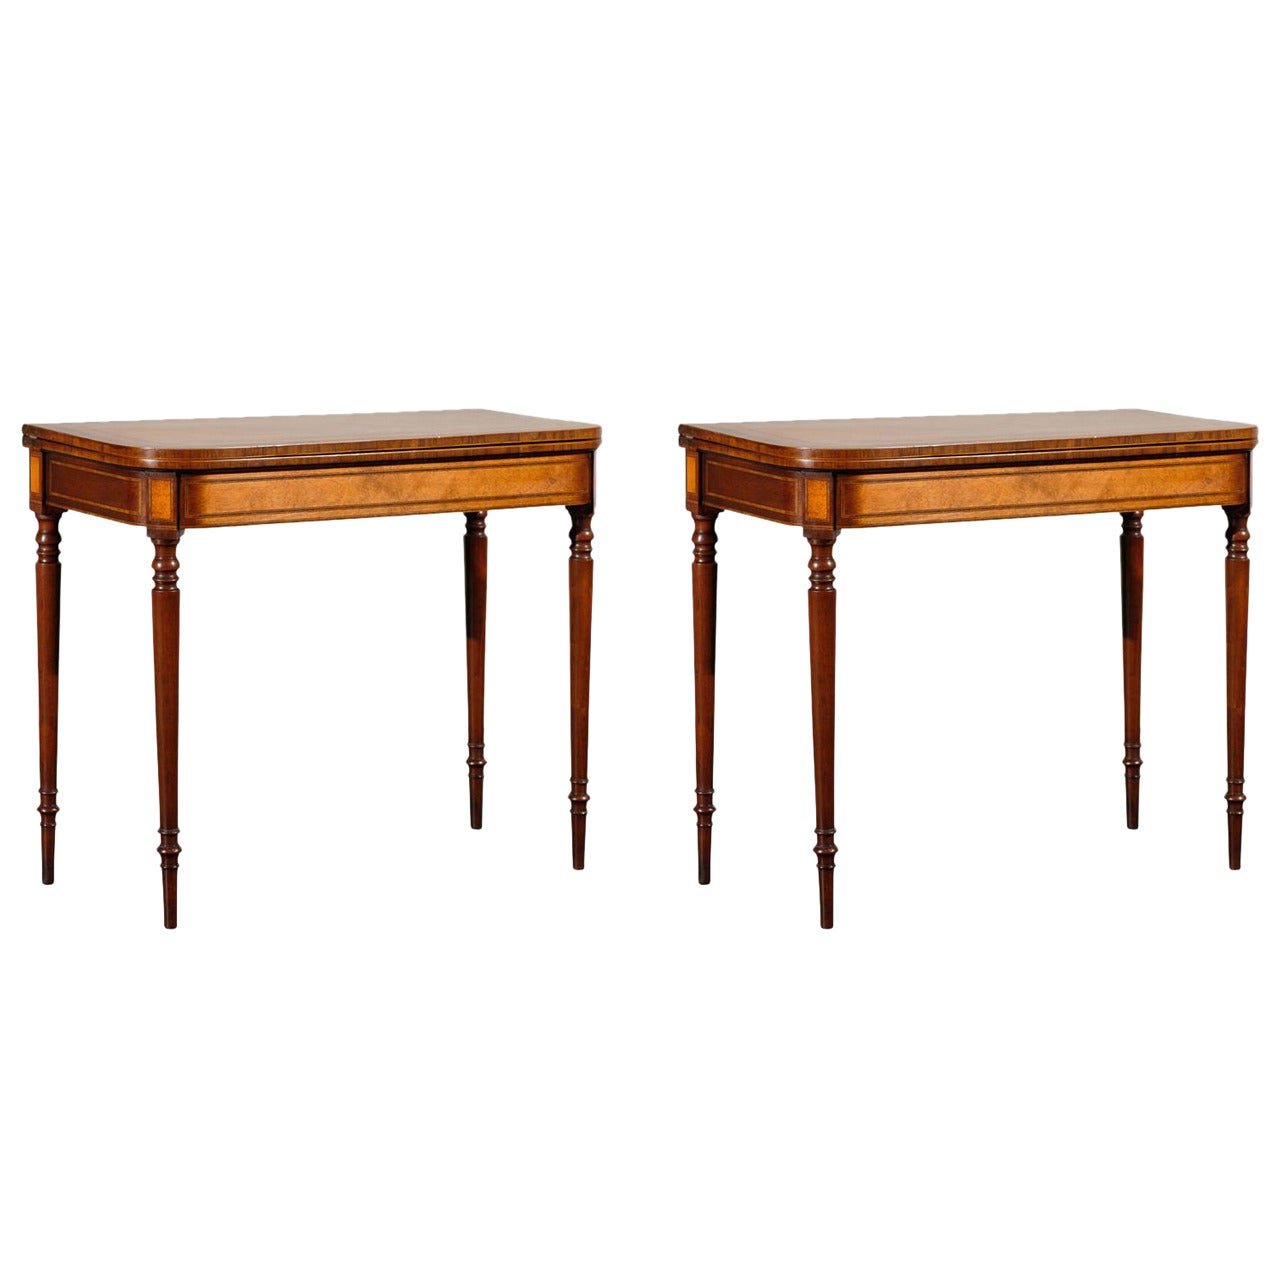 Pair of 19th Century Georgian Style Yew Wood Flip-Top Game Table